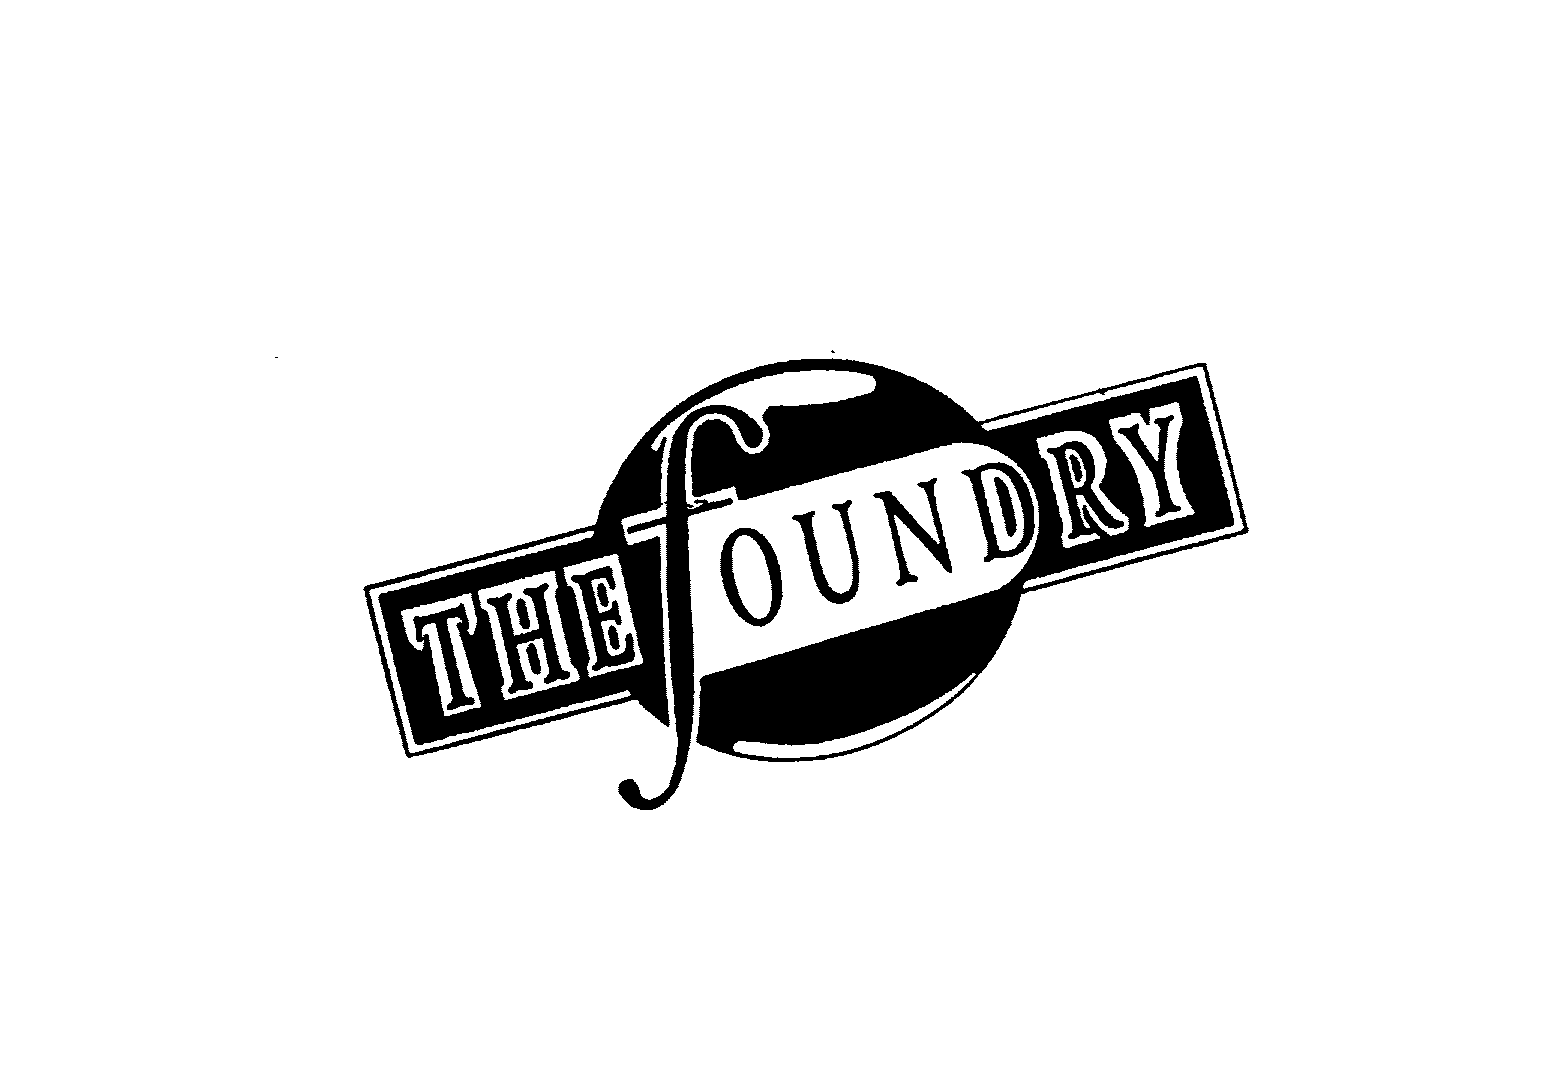 THE FOUNDRY